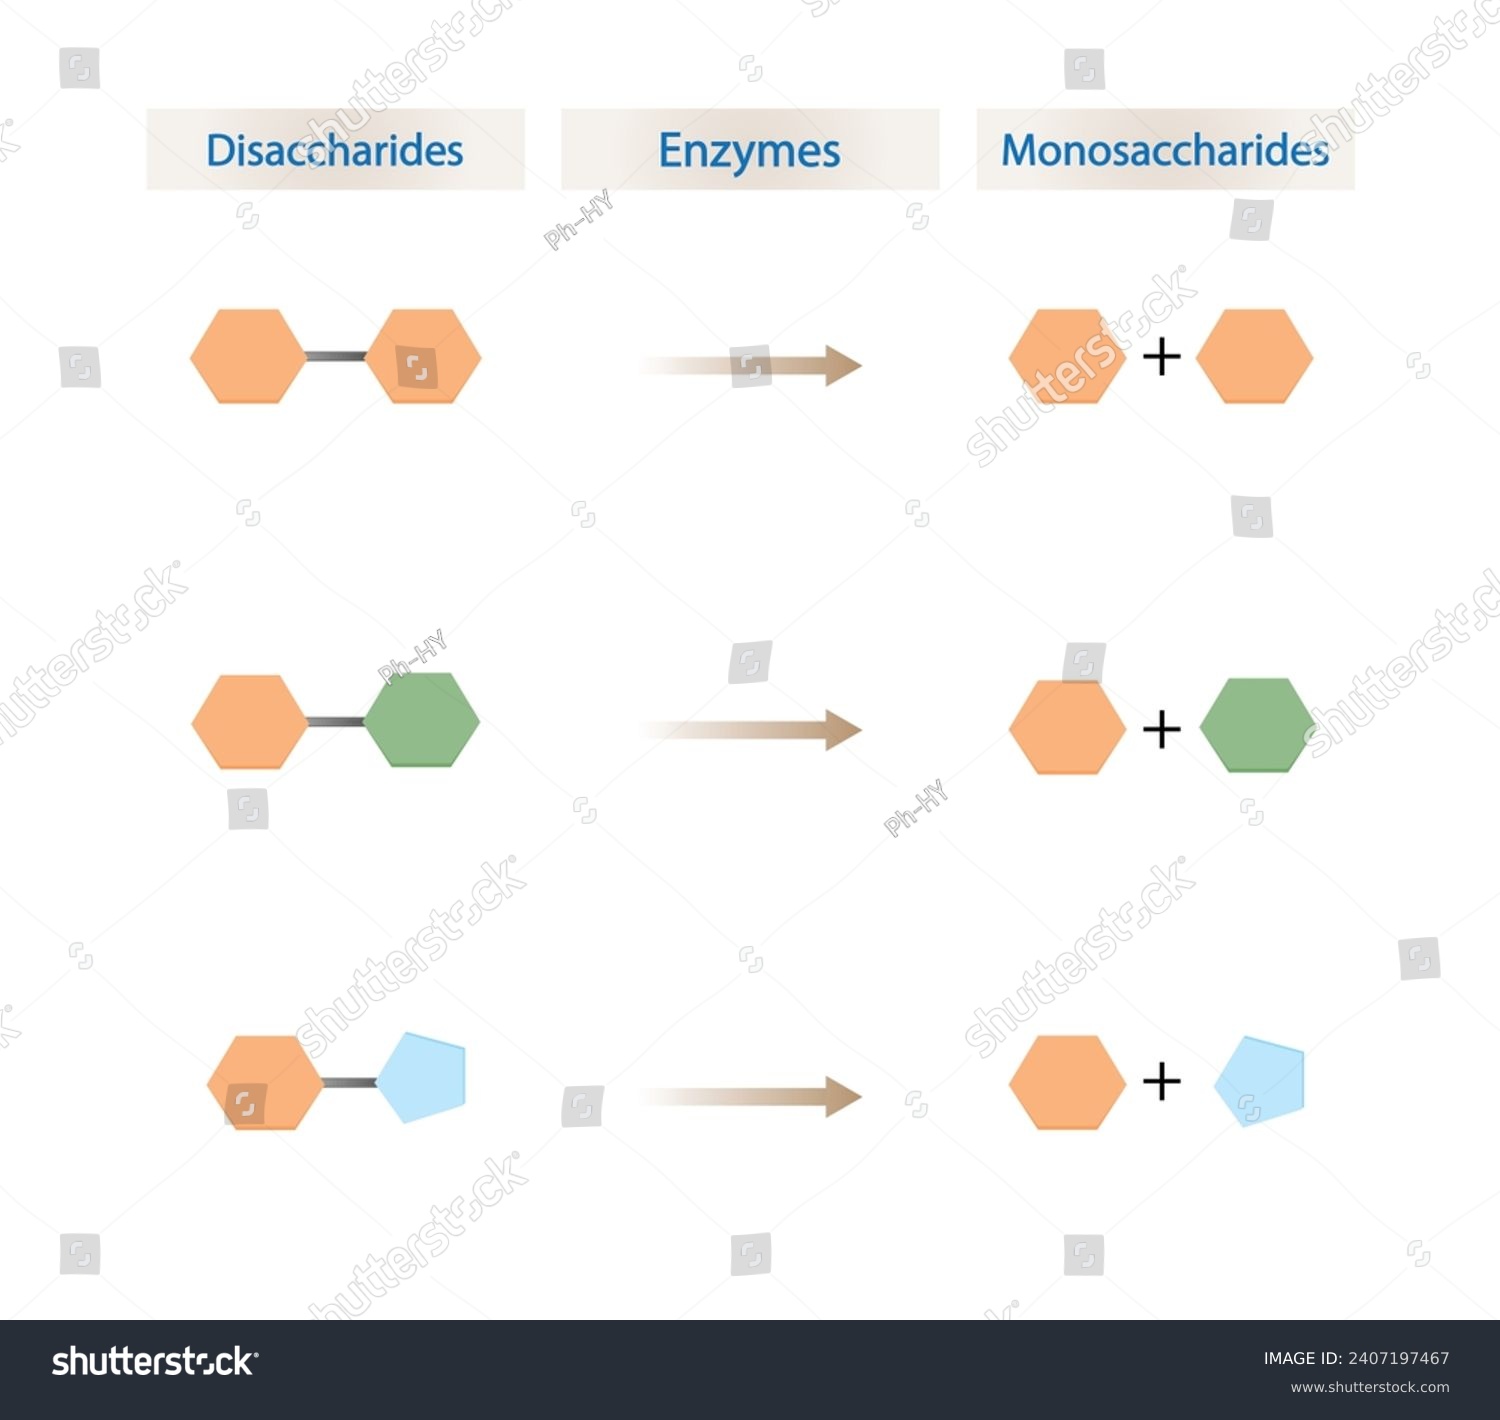 SVG of Carbohydrates Digestion. Maltase, Sucrase and Lactase Enzymes catalyze Disaccharides Maltose, Lactose and Sucrose to Monosaccharides, glucose, galactose and Fructose molecules. Vector Illustration. svg